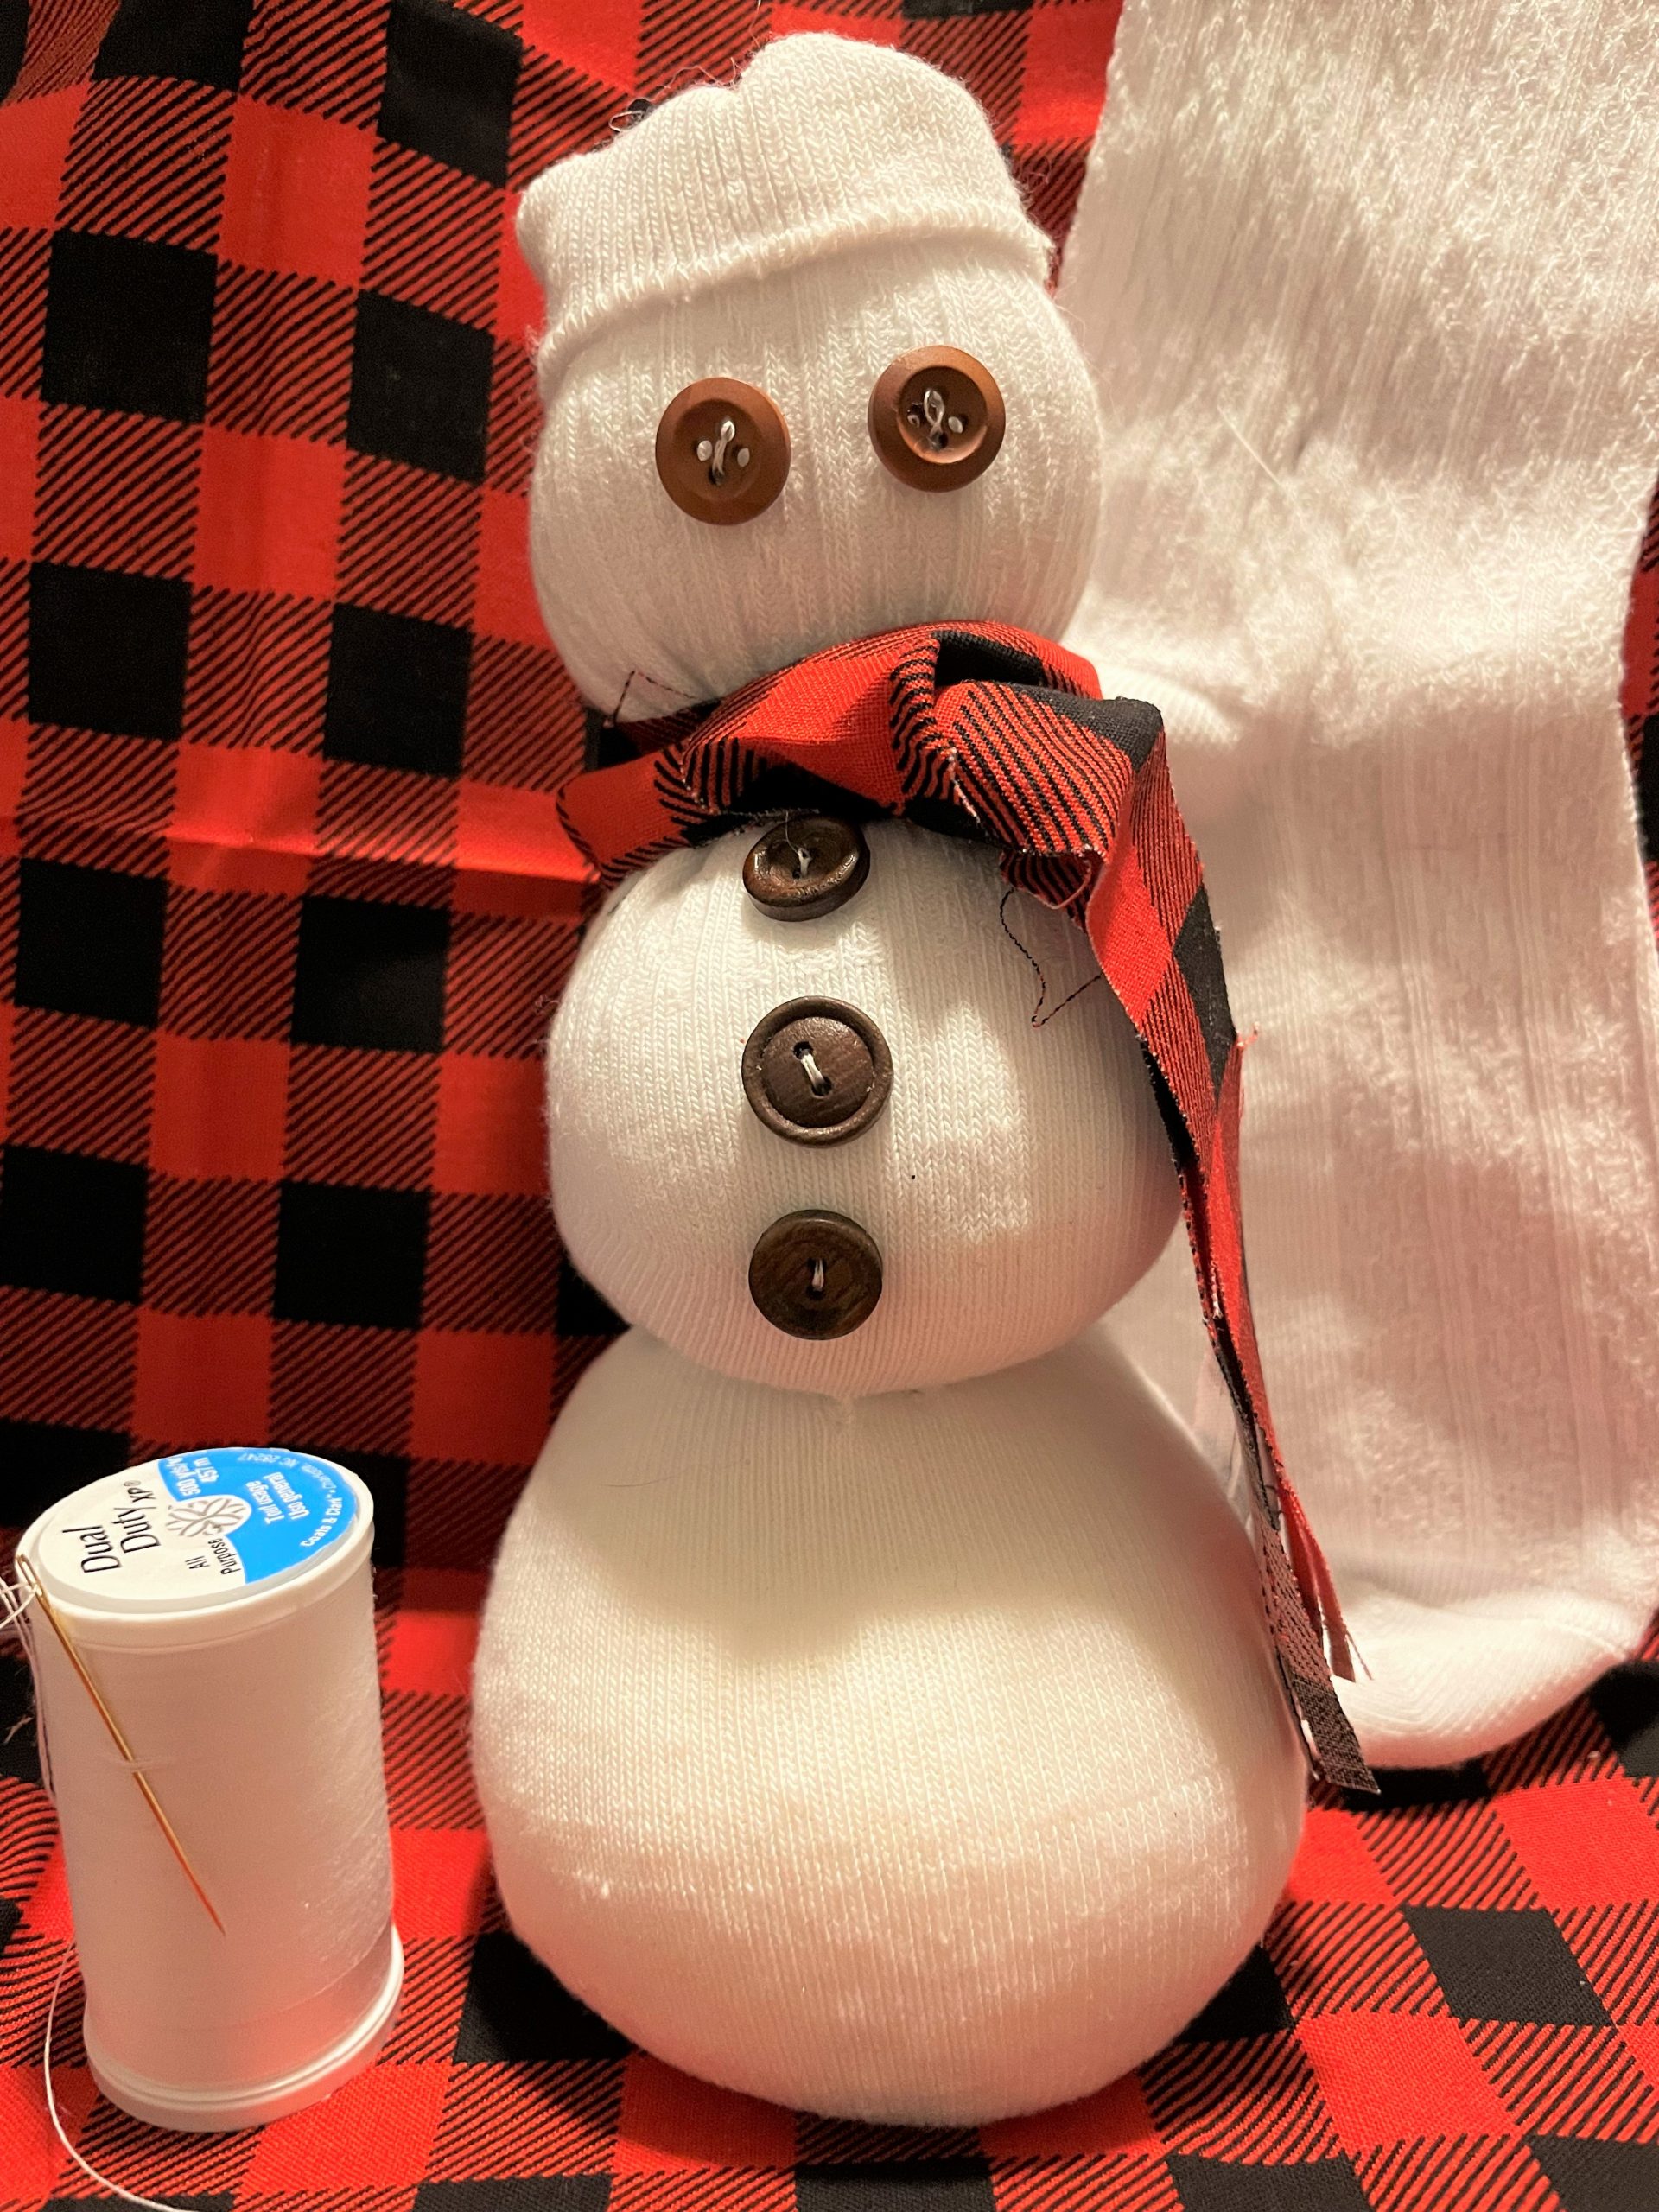 A snowman made from a sock. It has little button eyes. How cute!